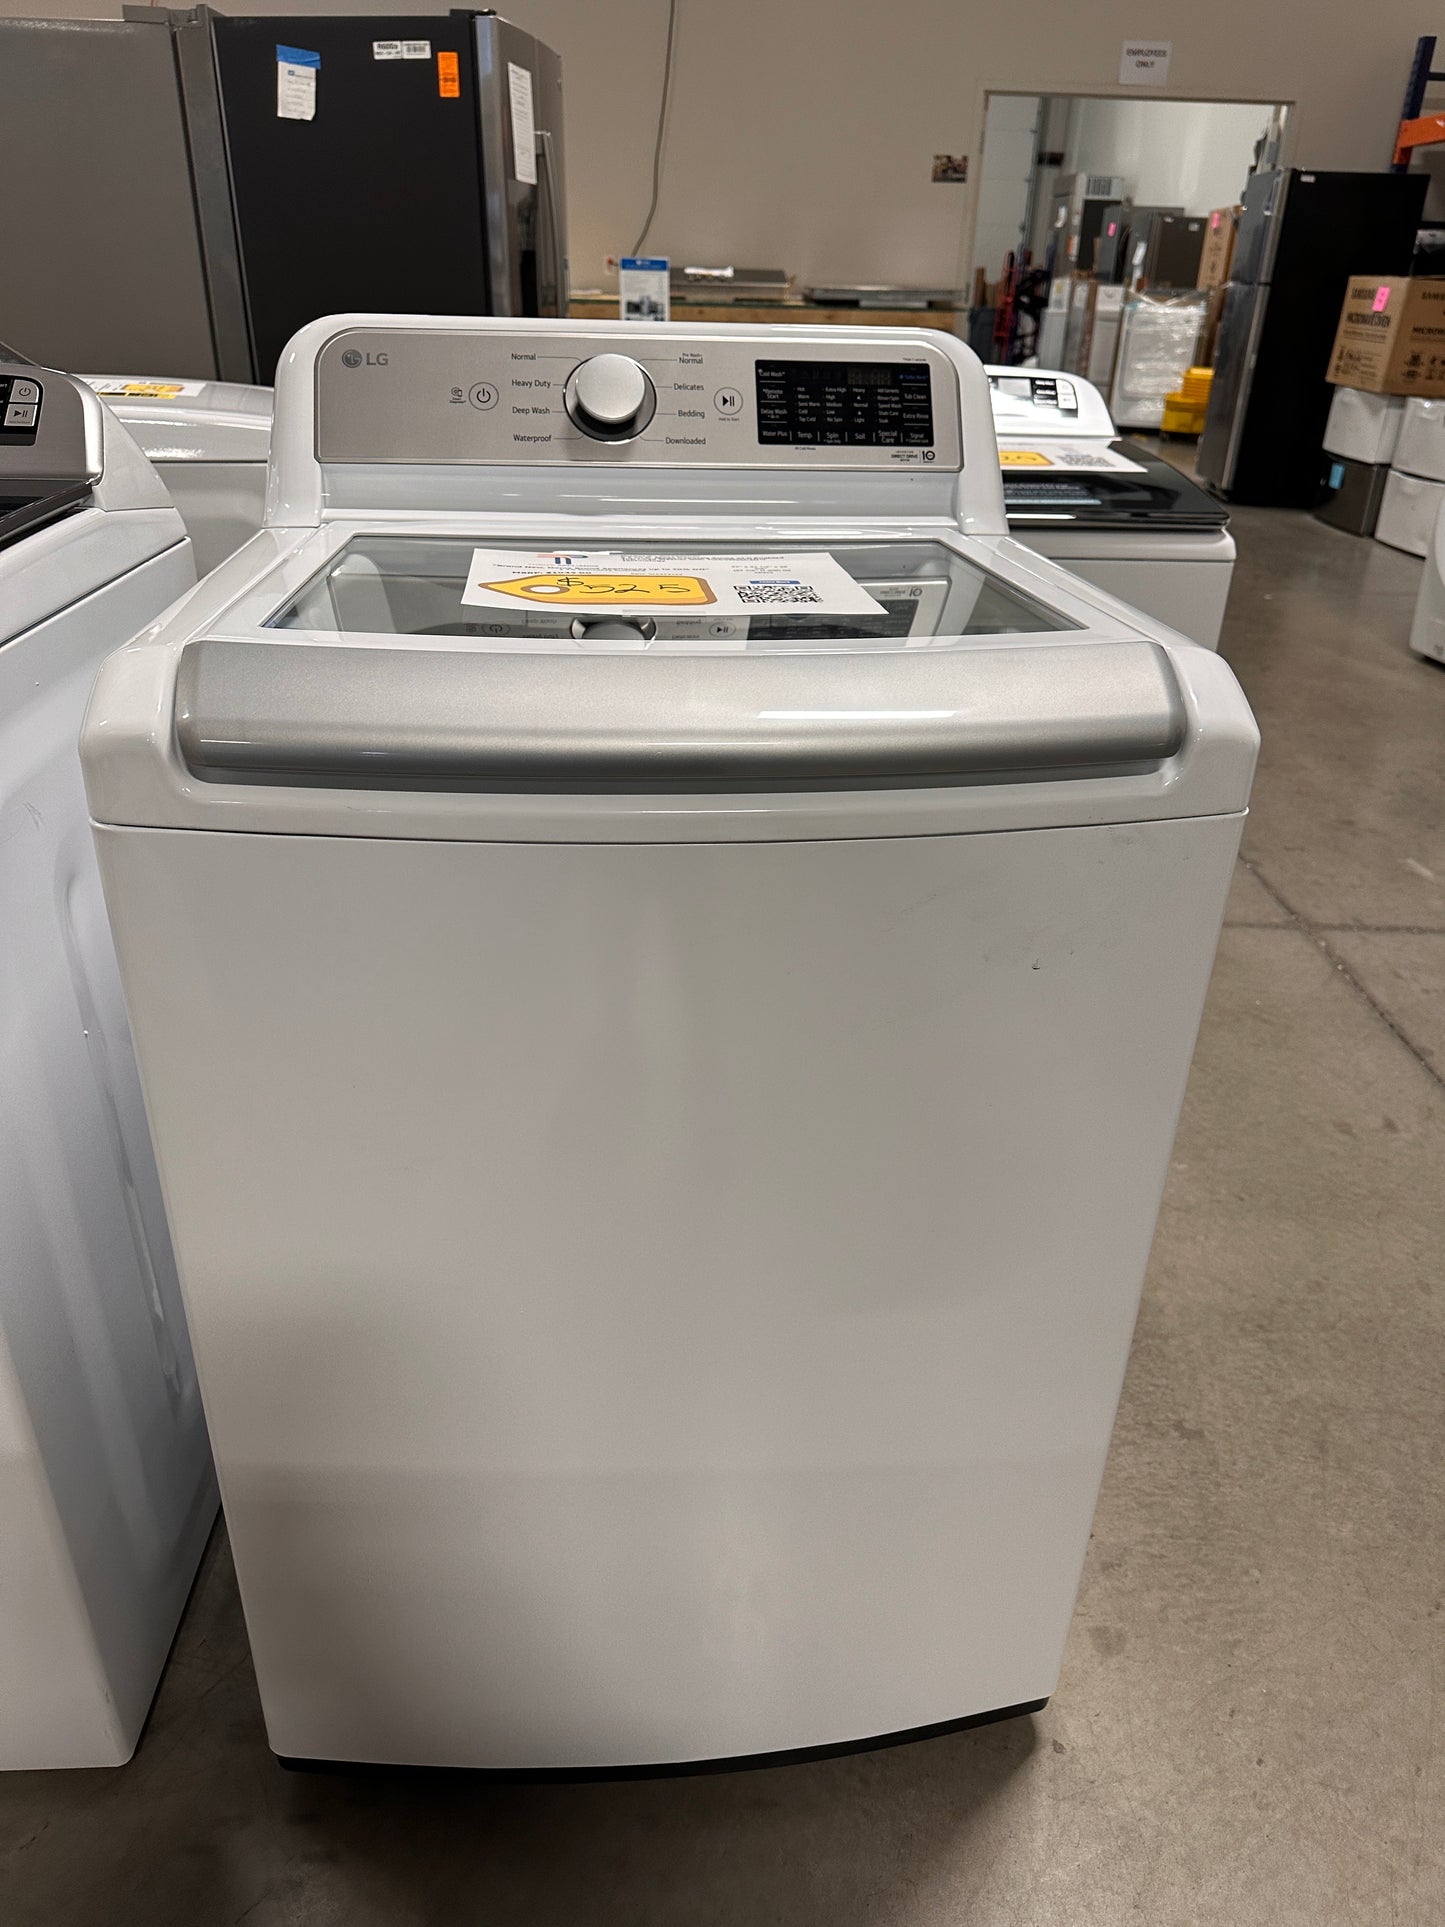 GREAT NEW SMART TOP LOAD LG WASHER MODEL: WT7400CW  WAS13159